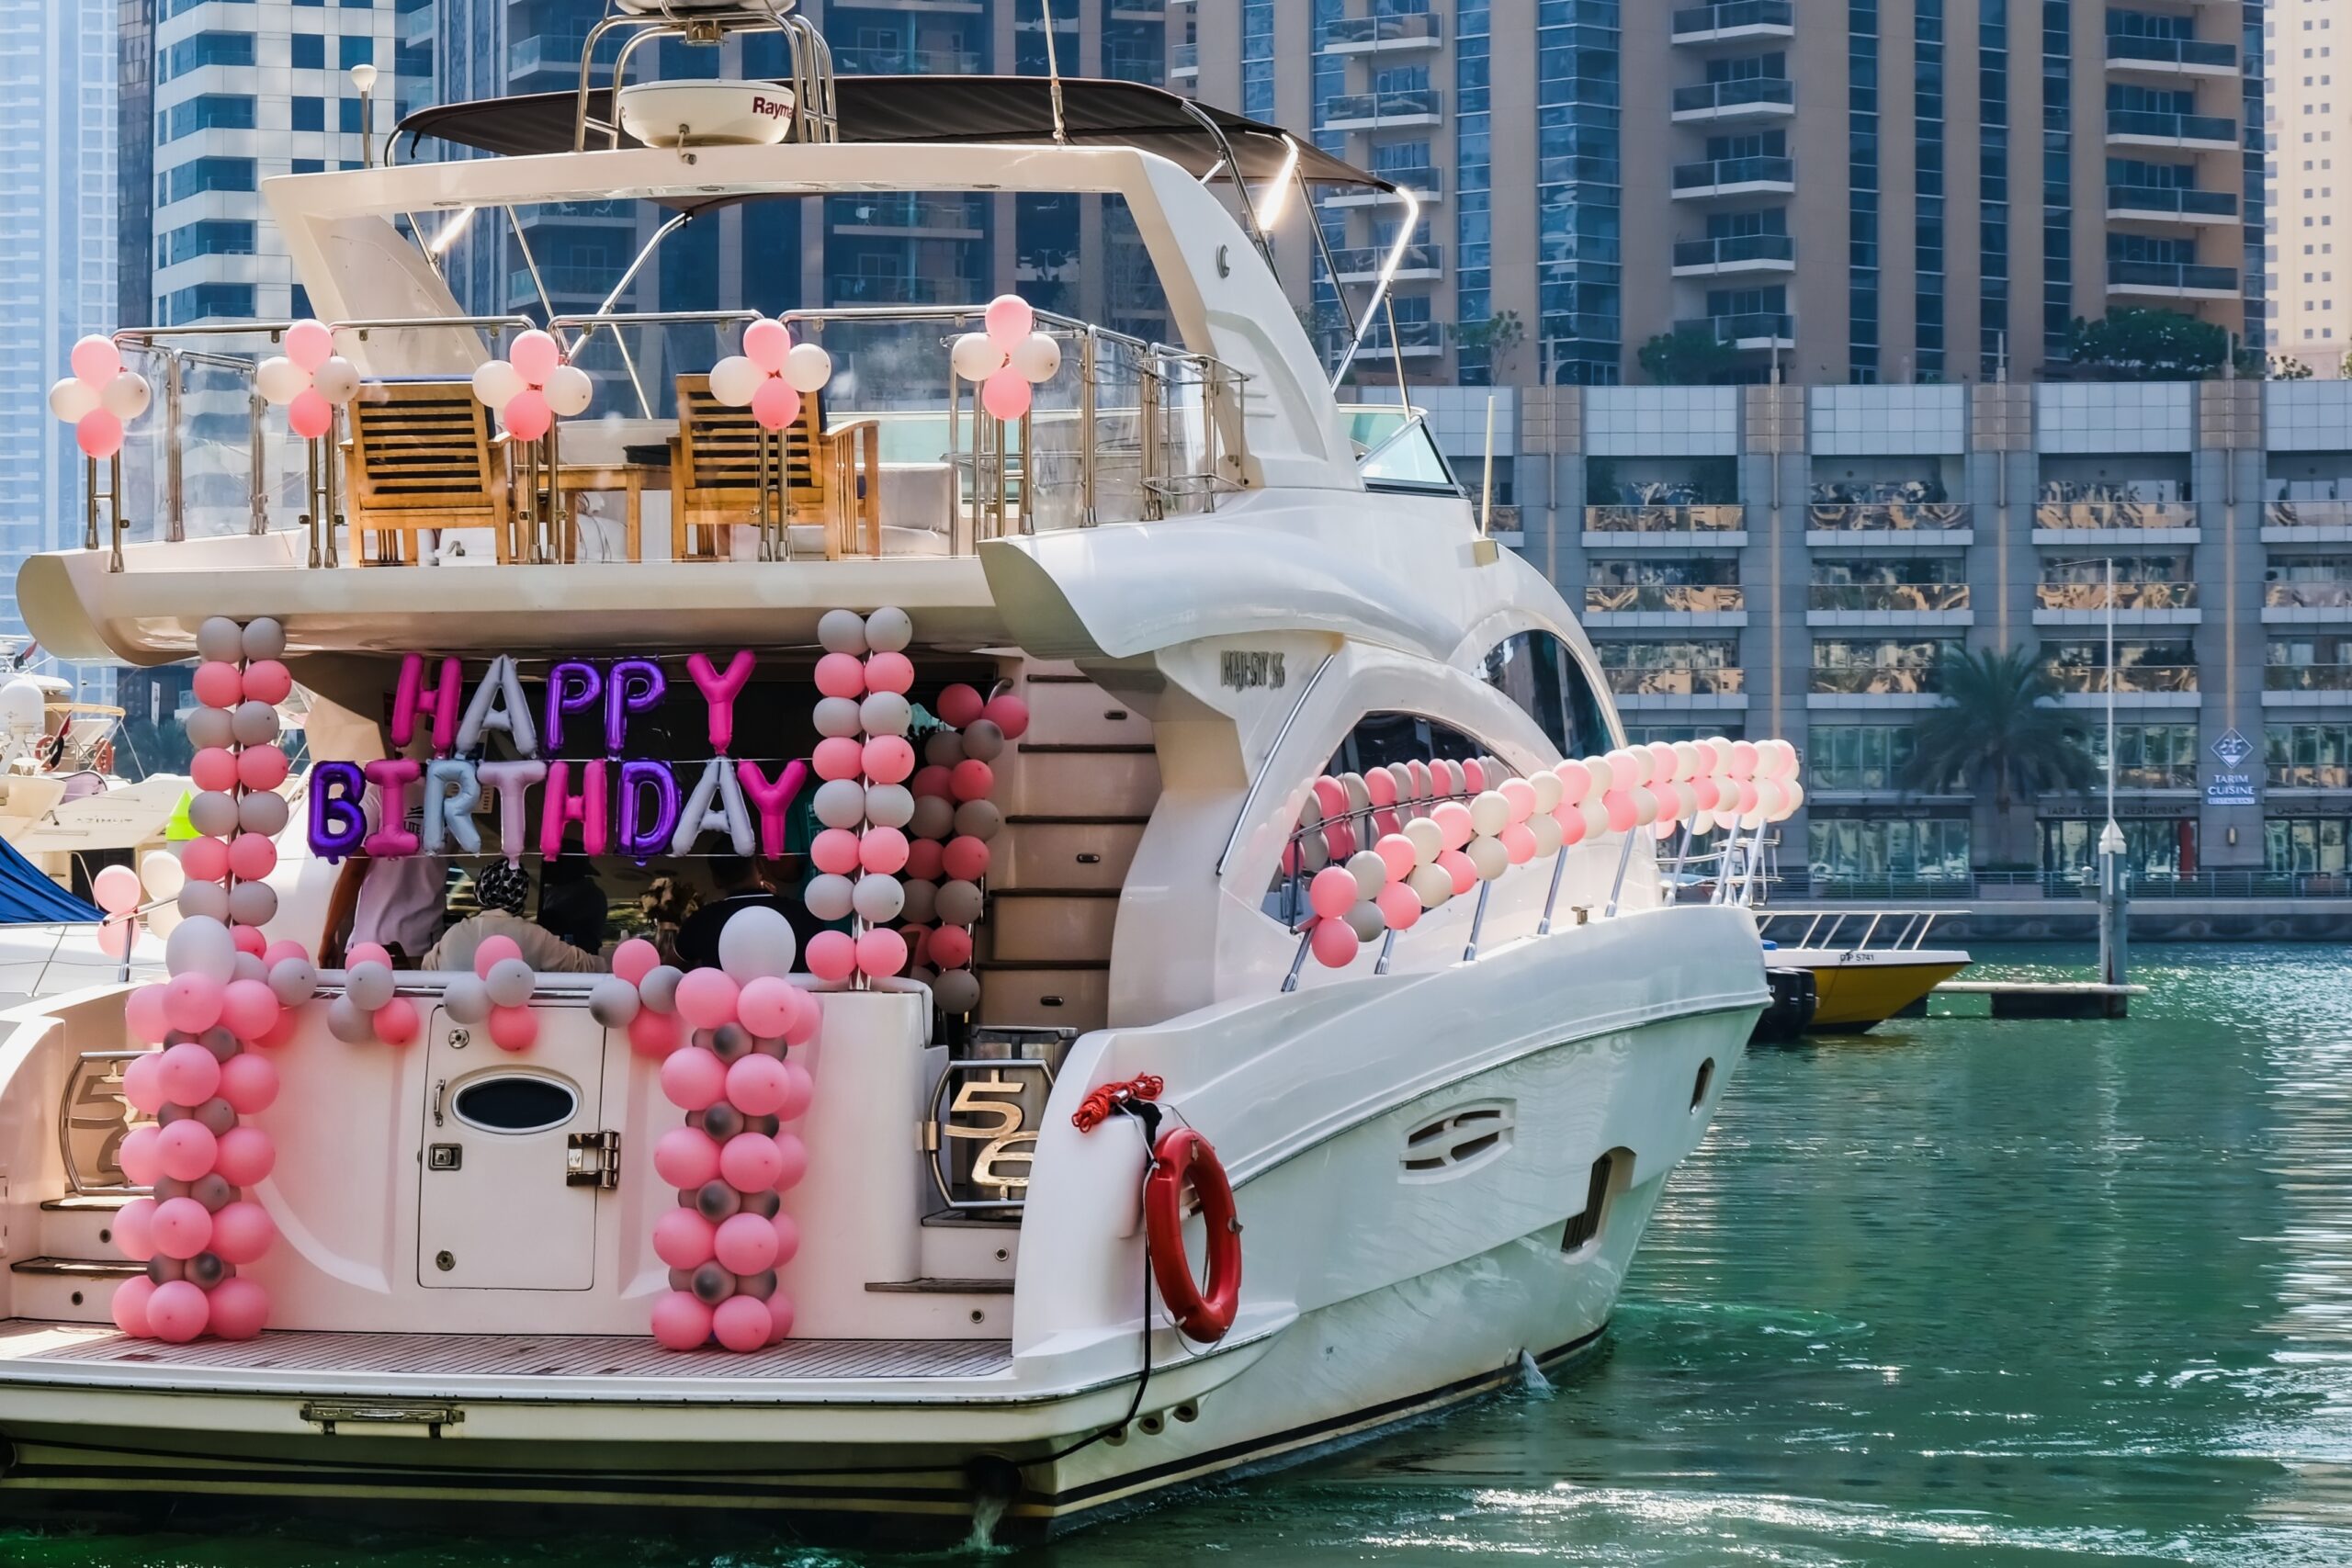 birthday party on a boat ideas by Charter One